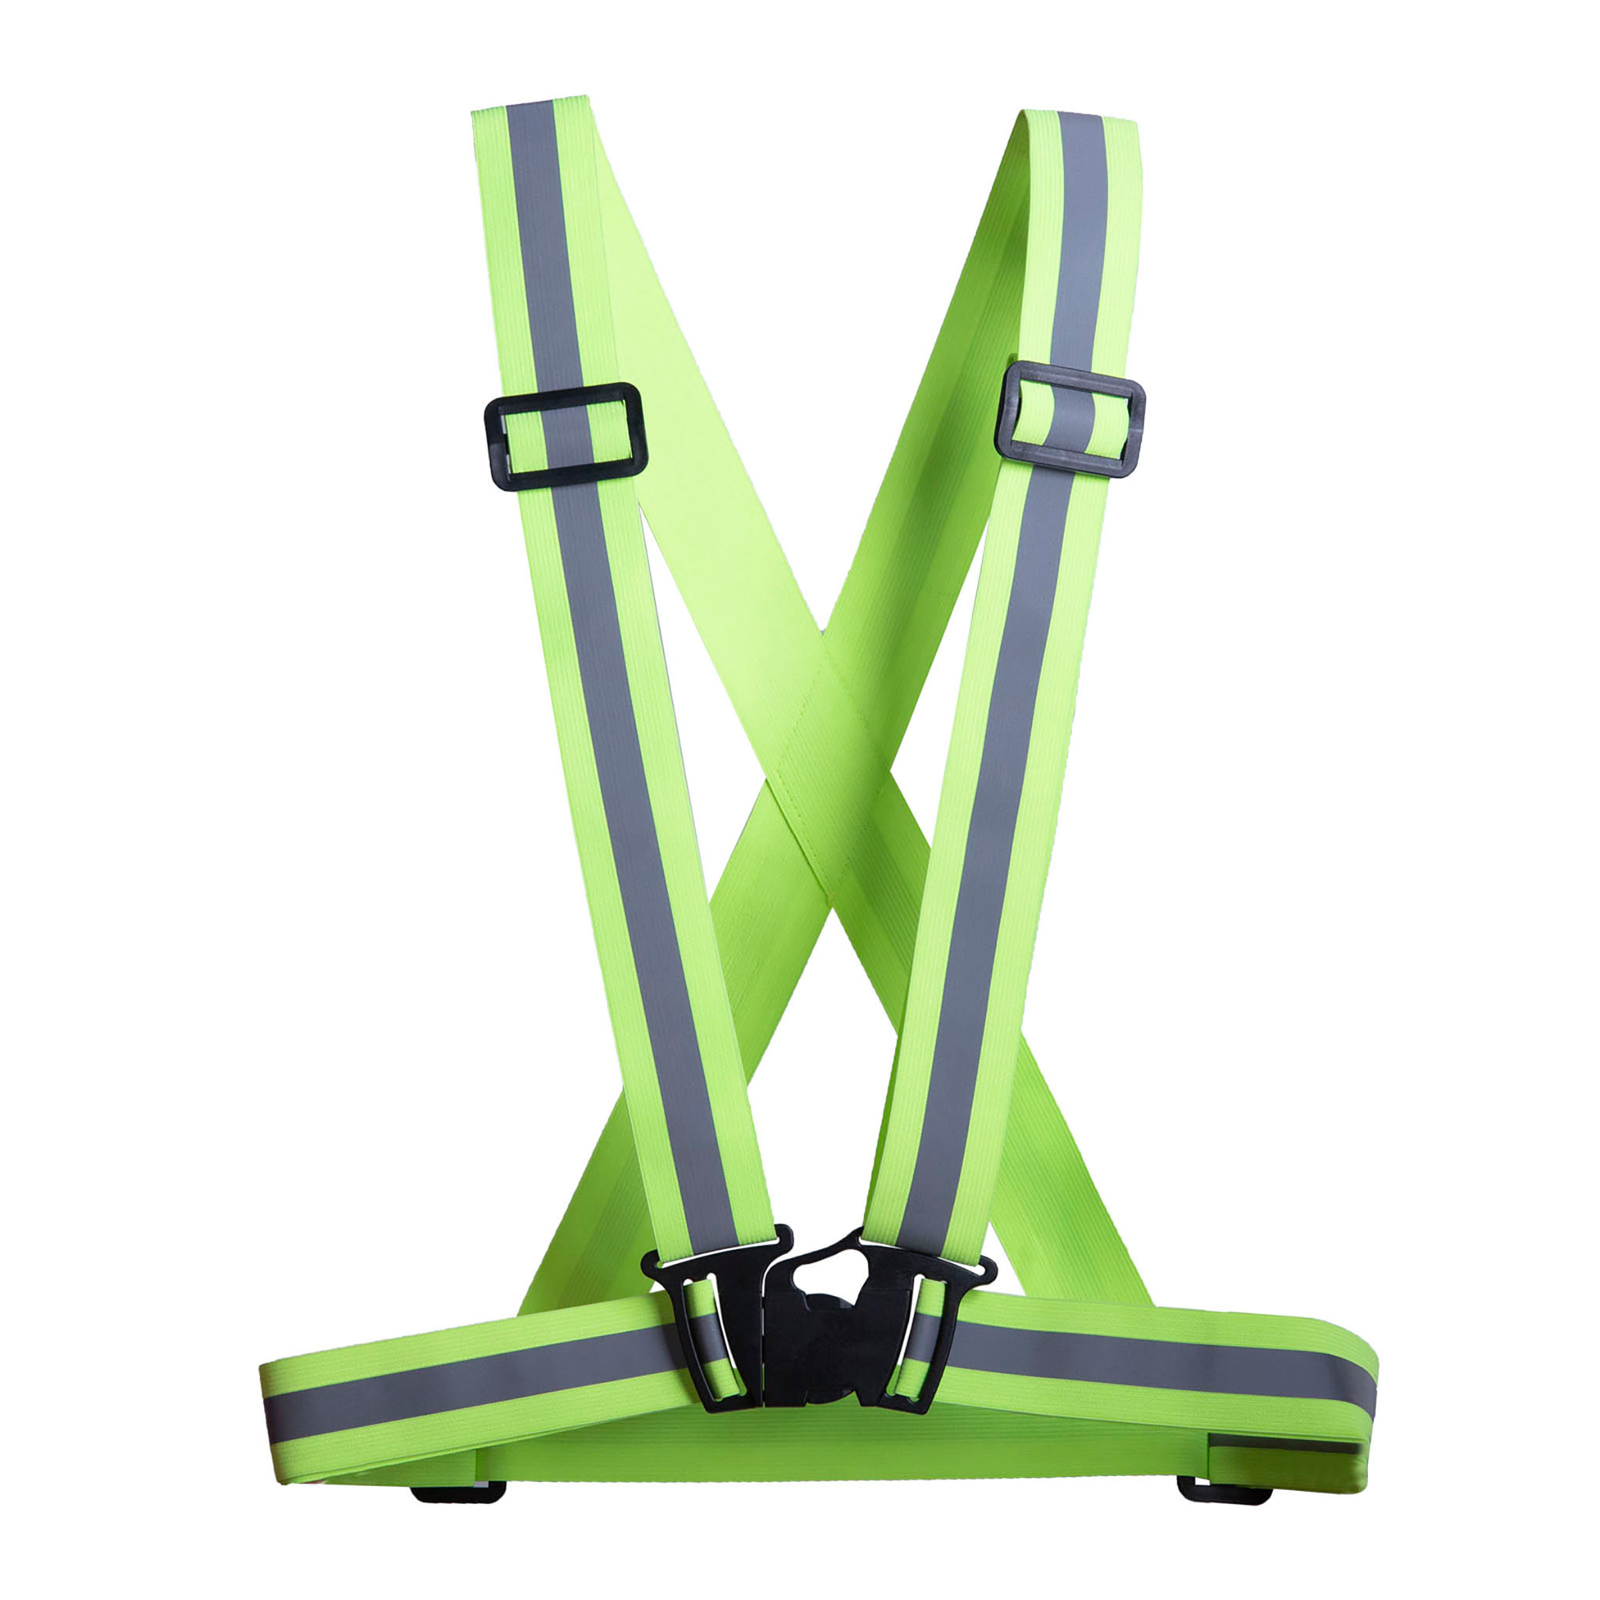 JORESTECH lime high visibility adjustable safety suspenders with reflective strips